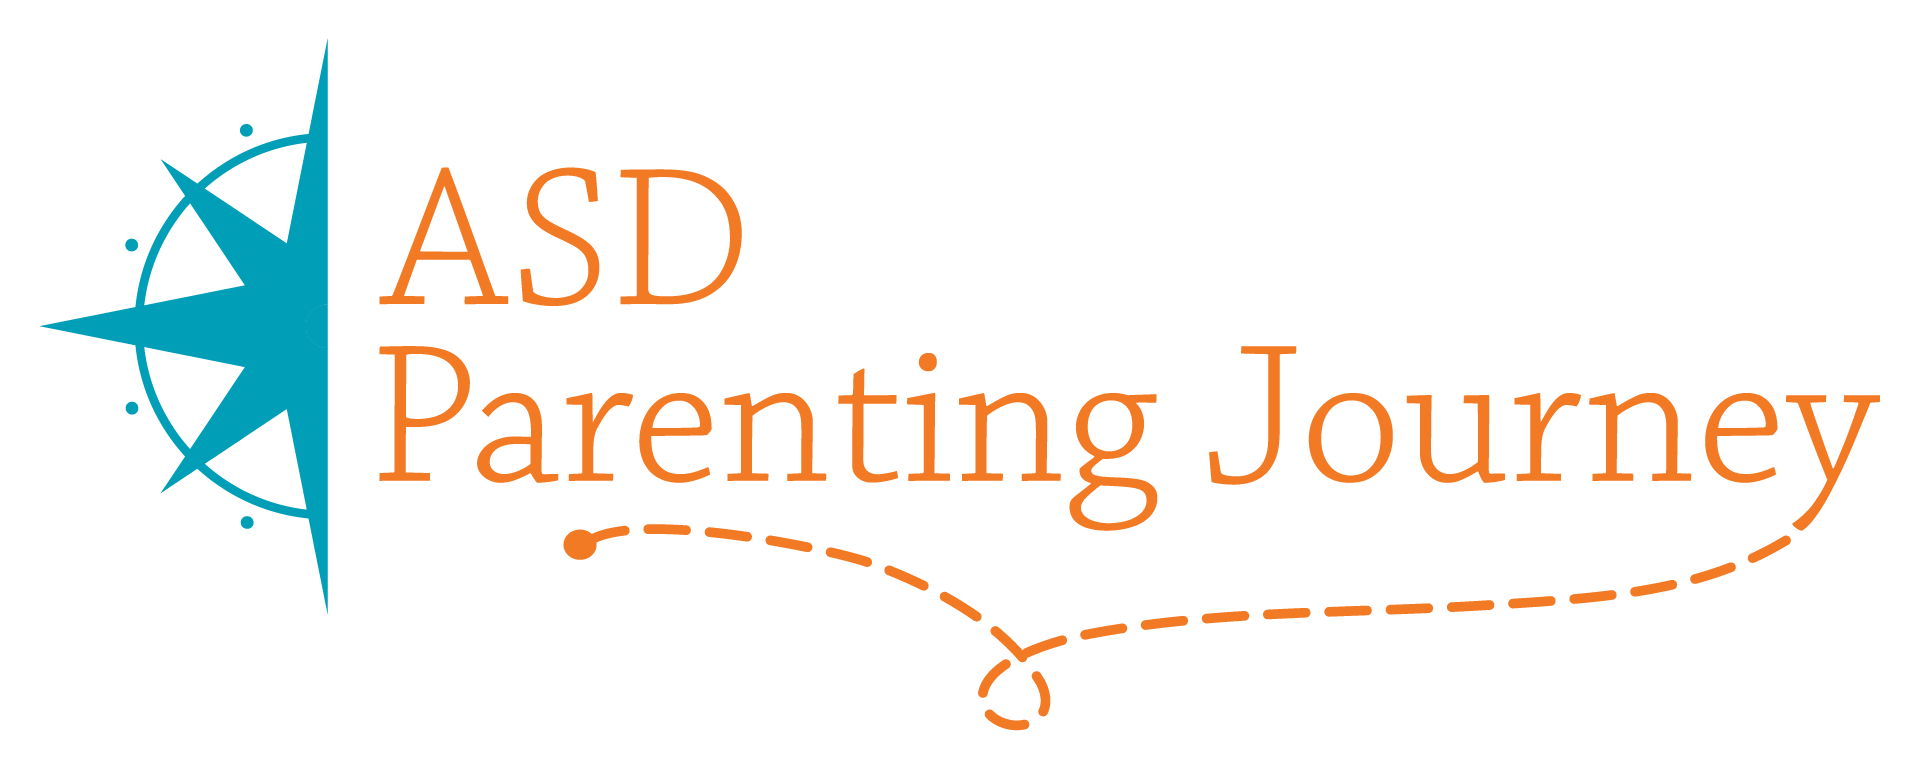 Logo with half of a blue compass on the left with the words ASD Parenting Journey to the right. A dotted line indicating a journey on a map underlines the words "Parenting Journey" and connects with the tail of the letter "y".